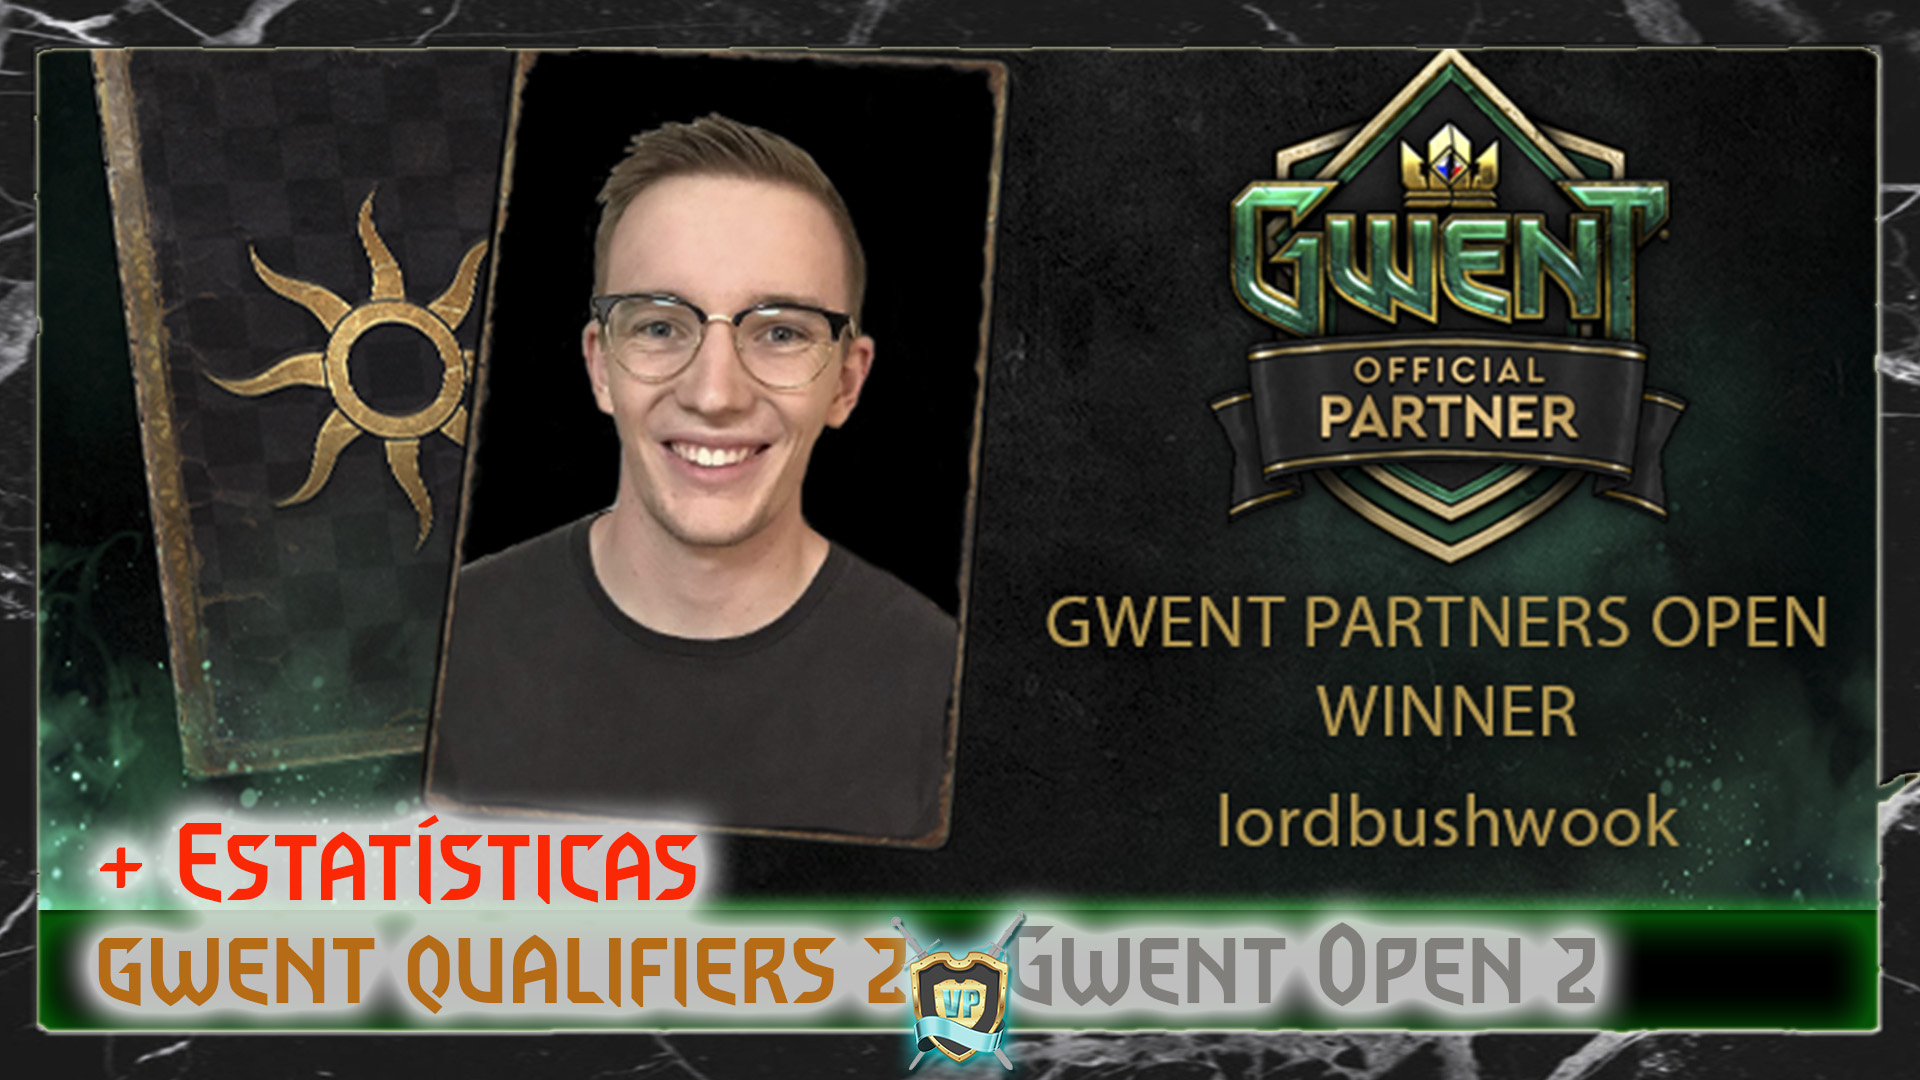 gwent partners open vencedor e gwent qualifiers 2